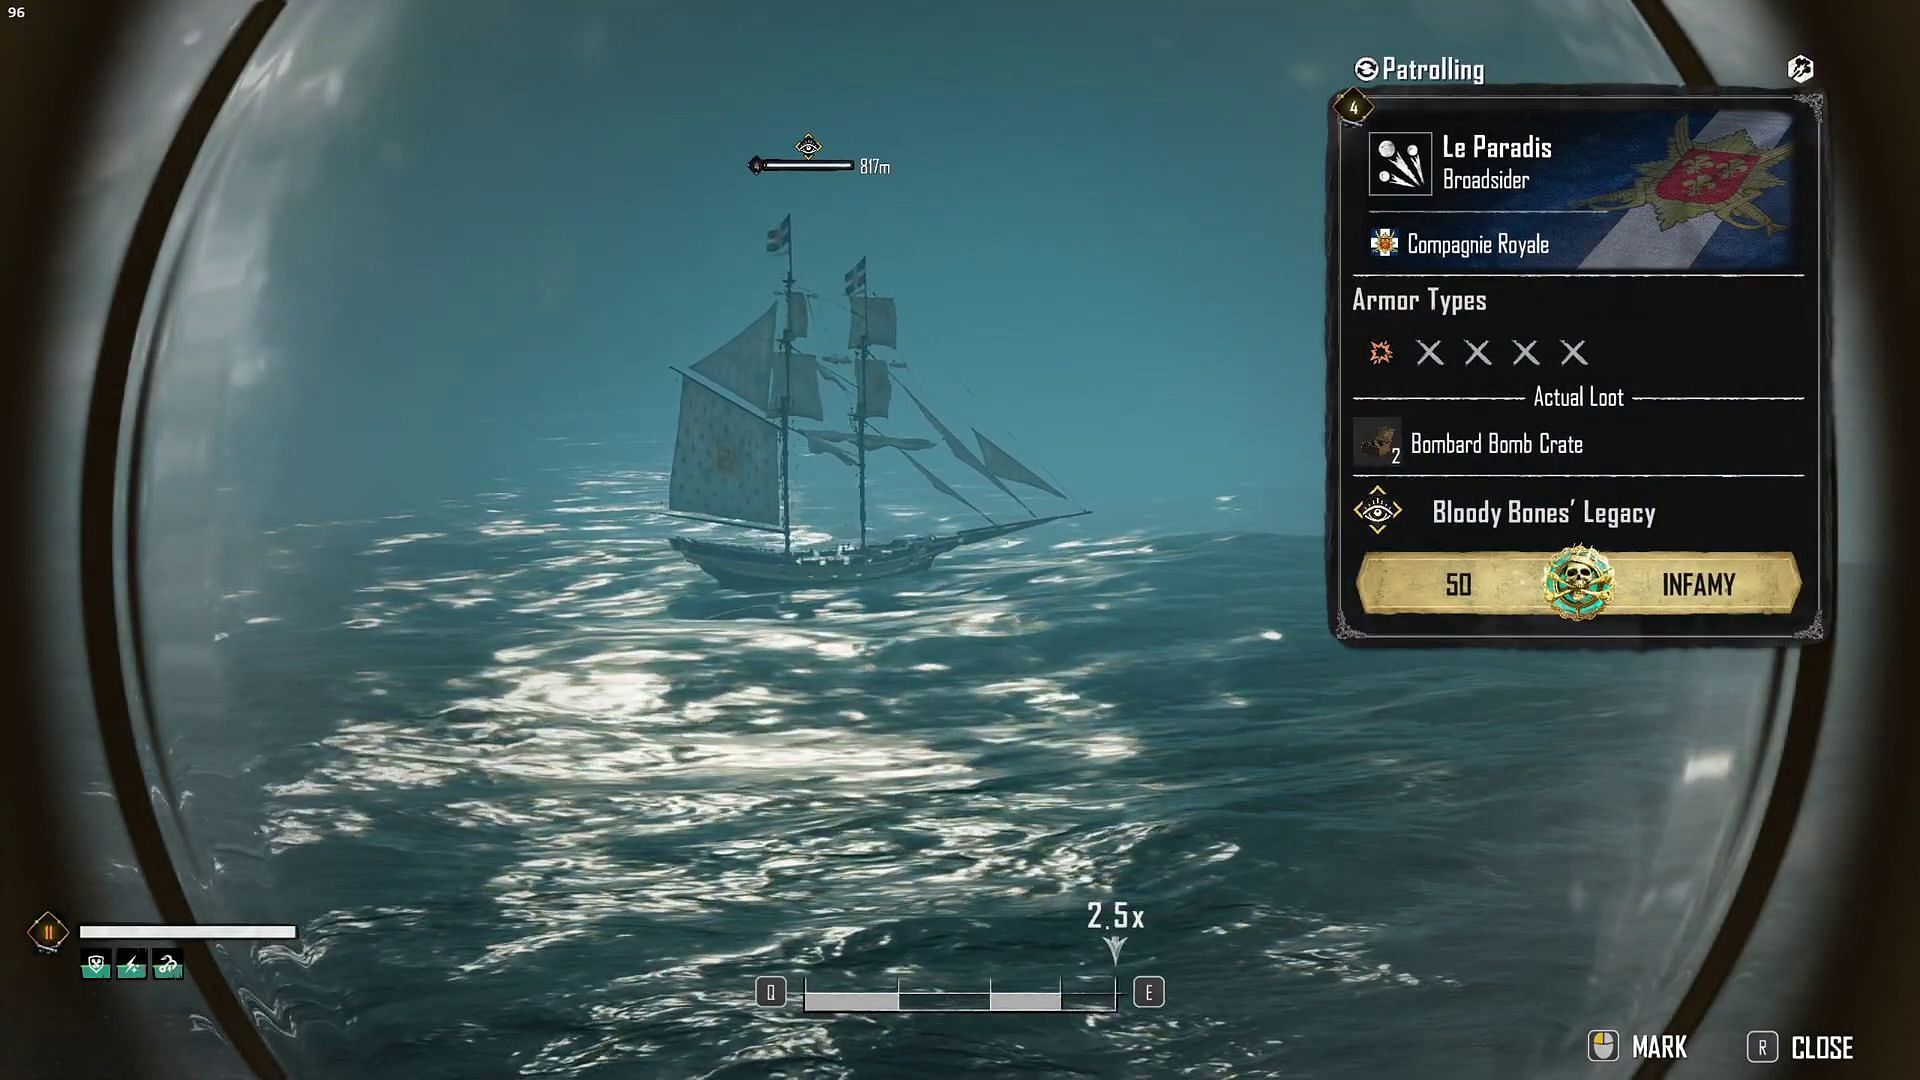 La Paradis in the Bloody Bones investigation that players need to sink (Image via Ubisoft/YouTube-Deadly Deity)